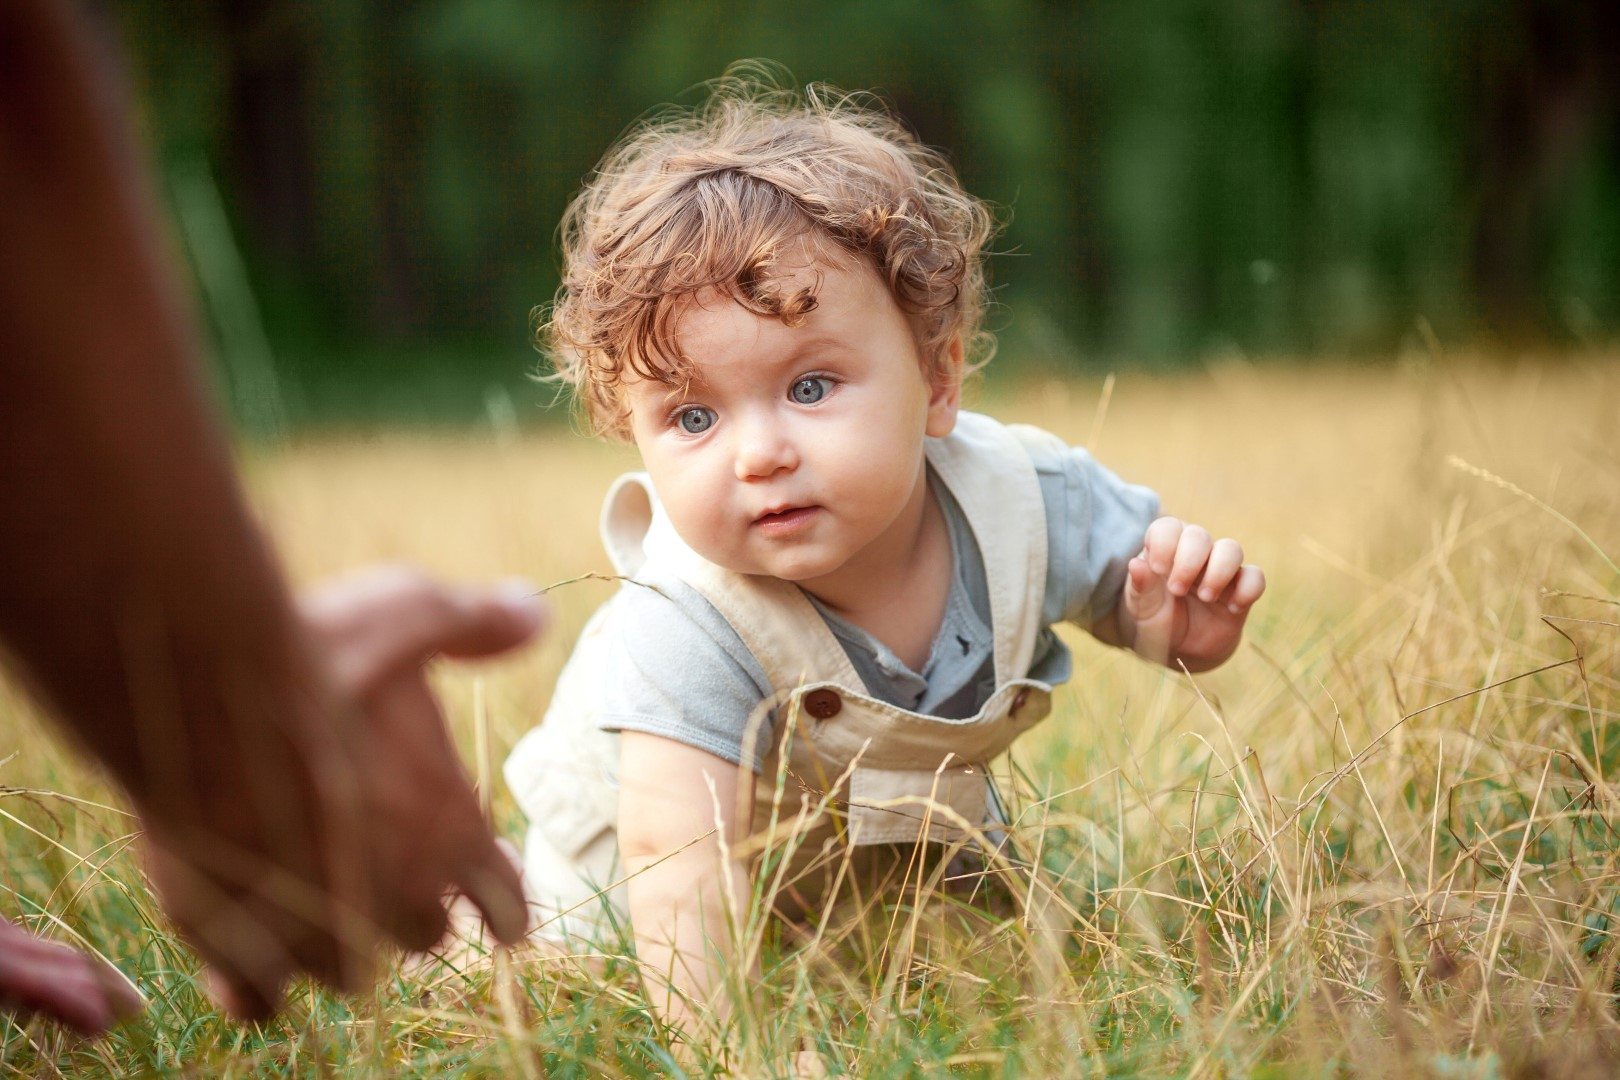 The little baby or year-old child on the grass in sunny summer day.